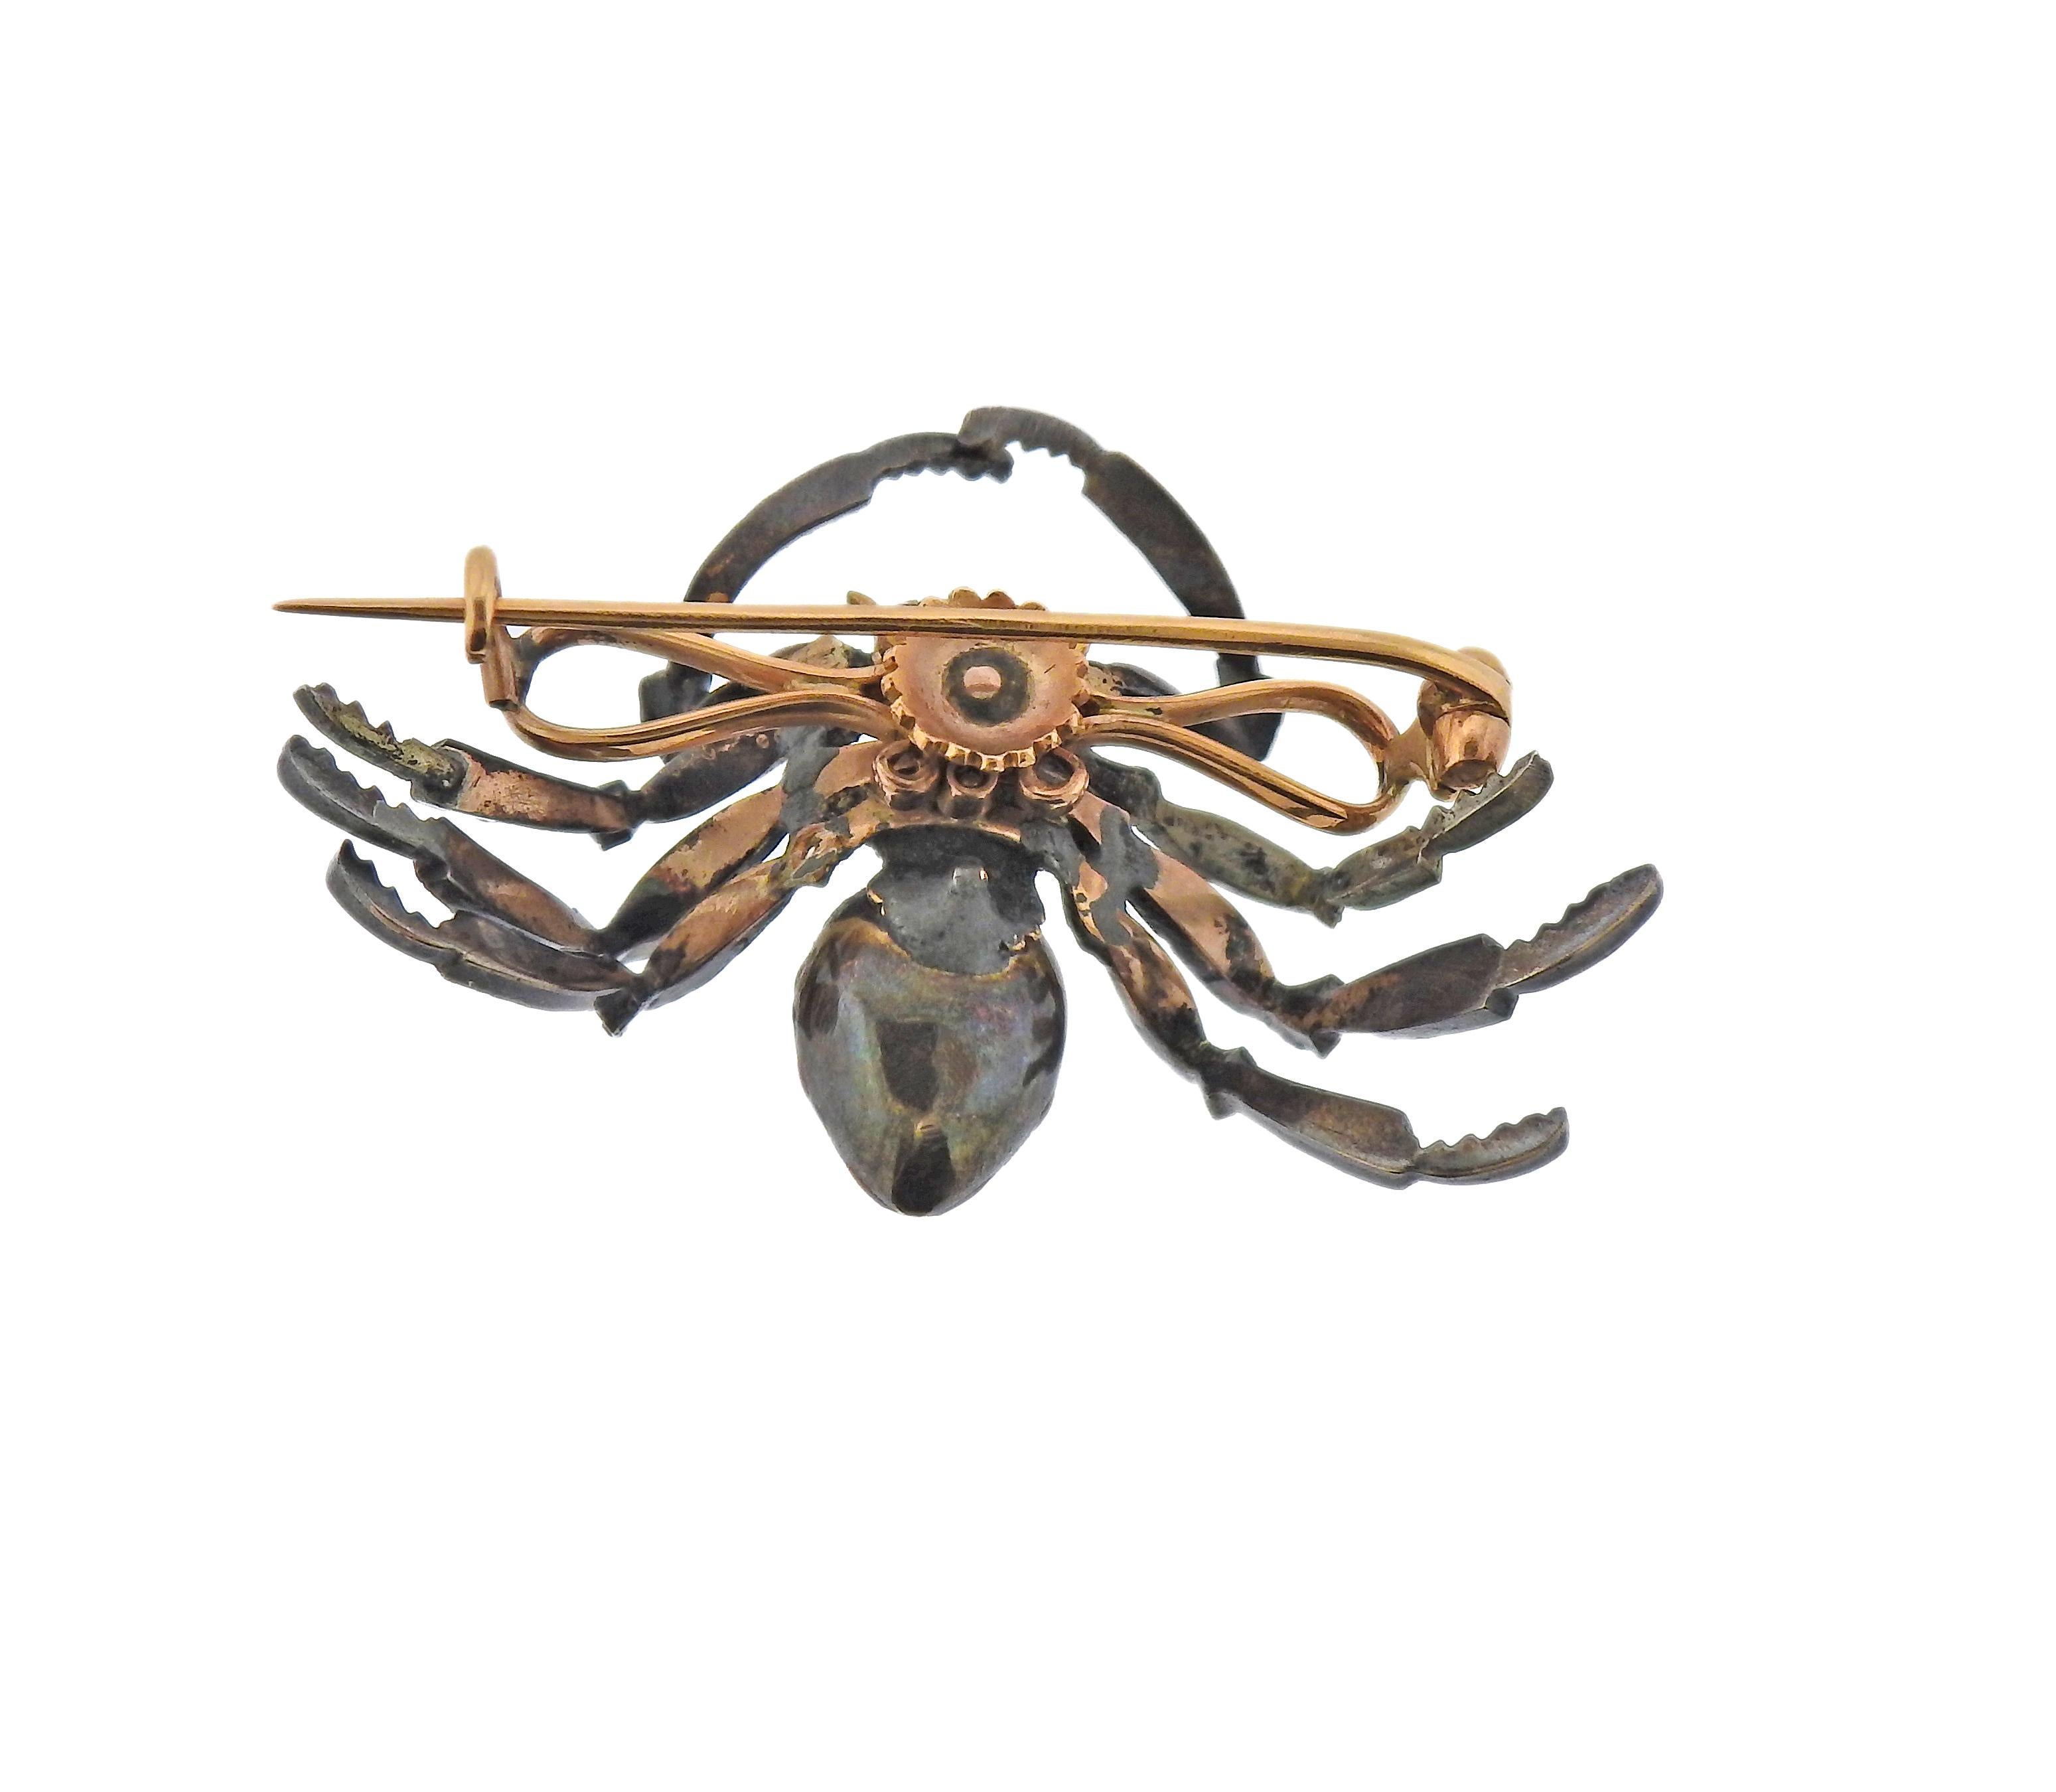 Antique silver and 14k gold spider brooch, set with rose cut diamonds and enamel. Brooch measures 45mm x 29mm. Weight - 10.3 grams. 